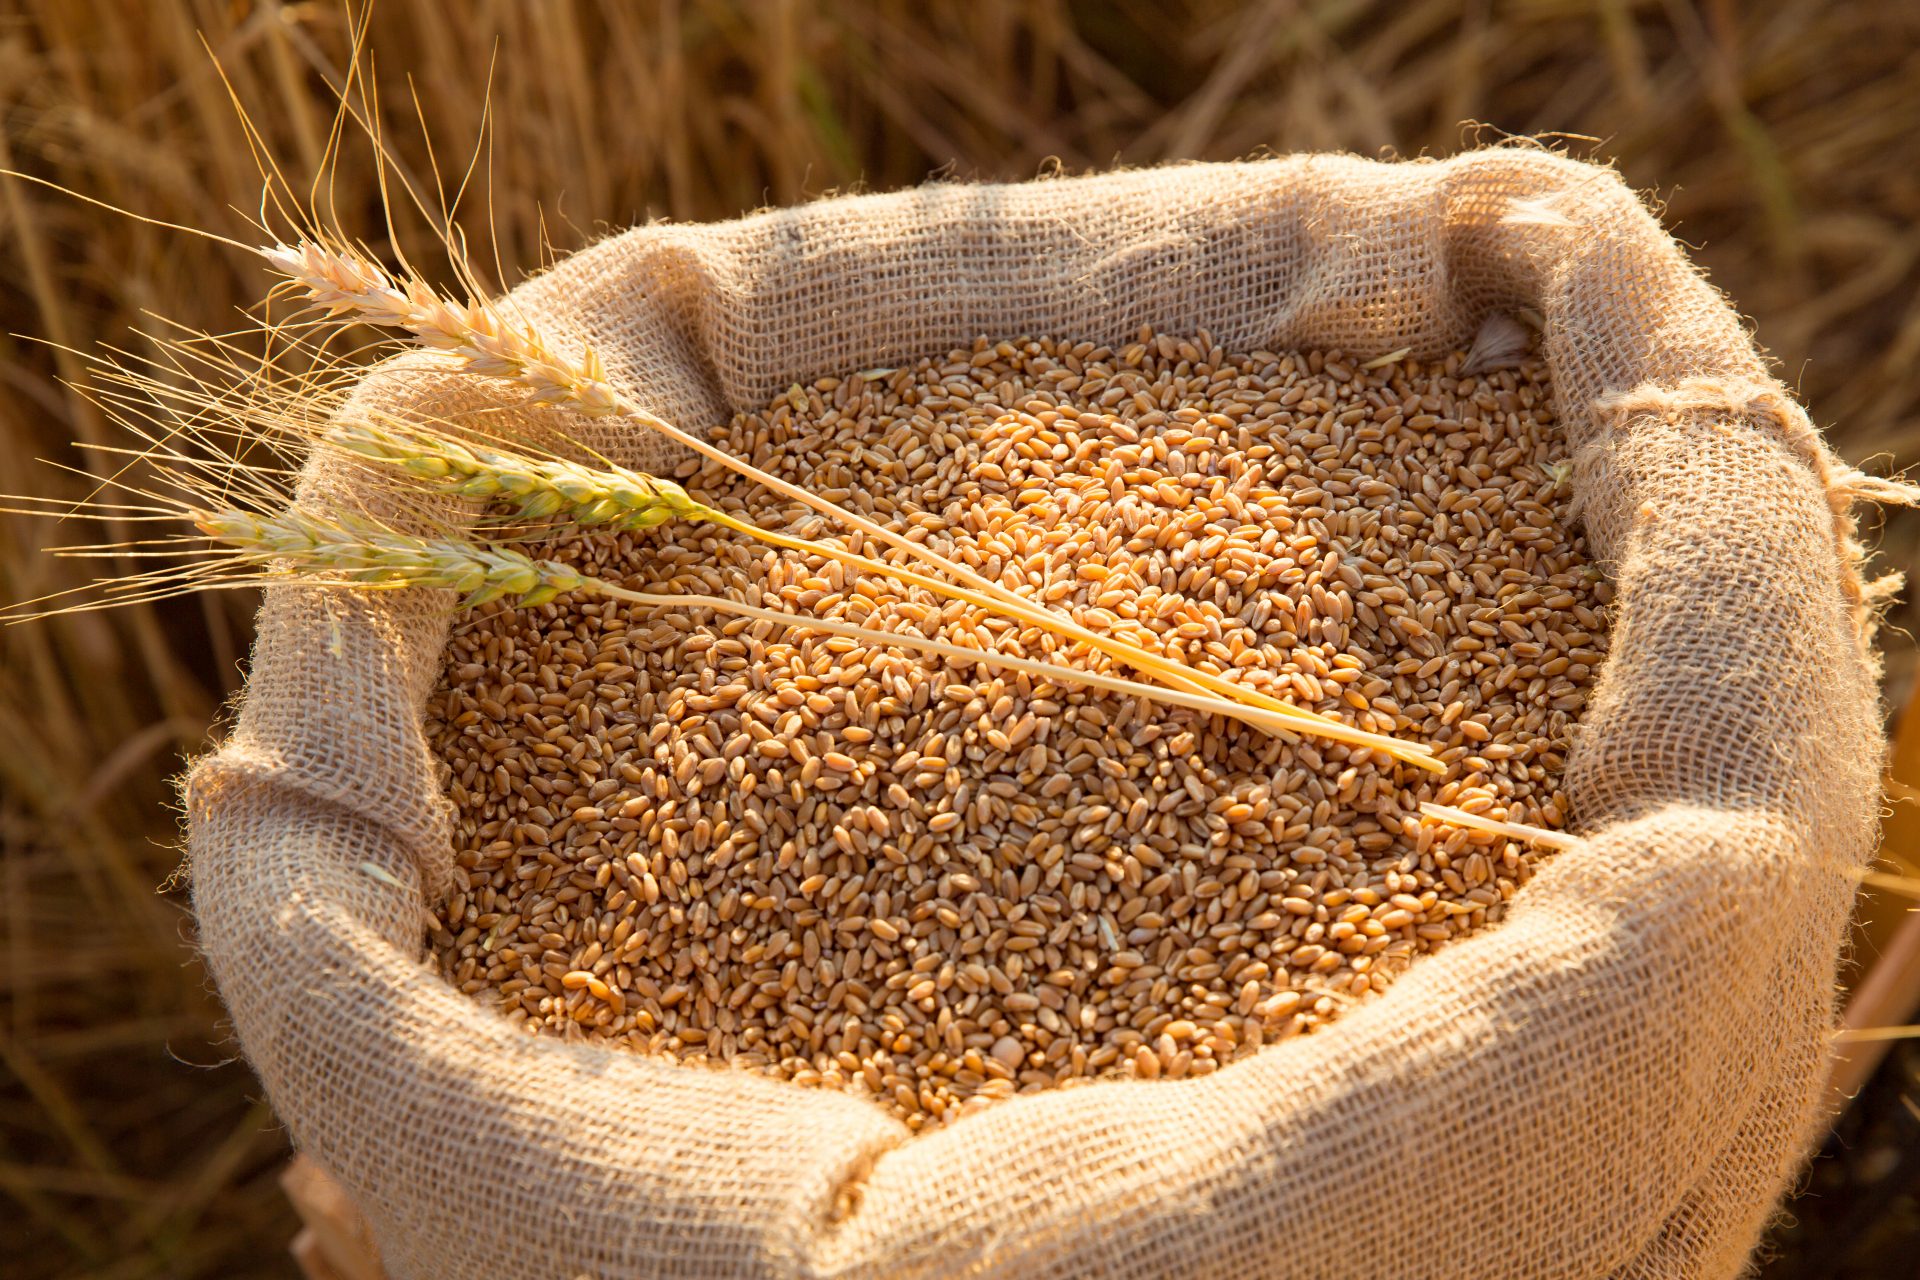 canvas-bag-with-wheat-grains-and-mown-wheat-ears-in-field-at-sunset-concept-of-grain-harvesting-in-agriculture